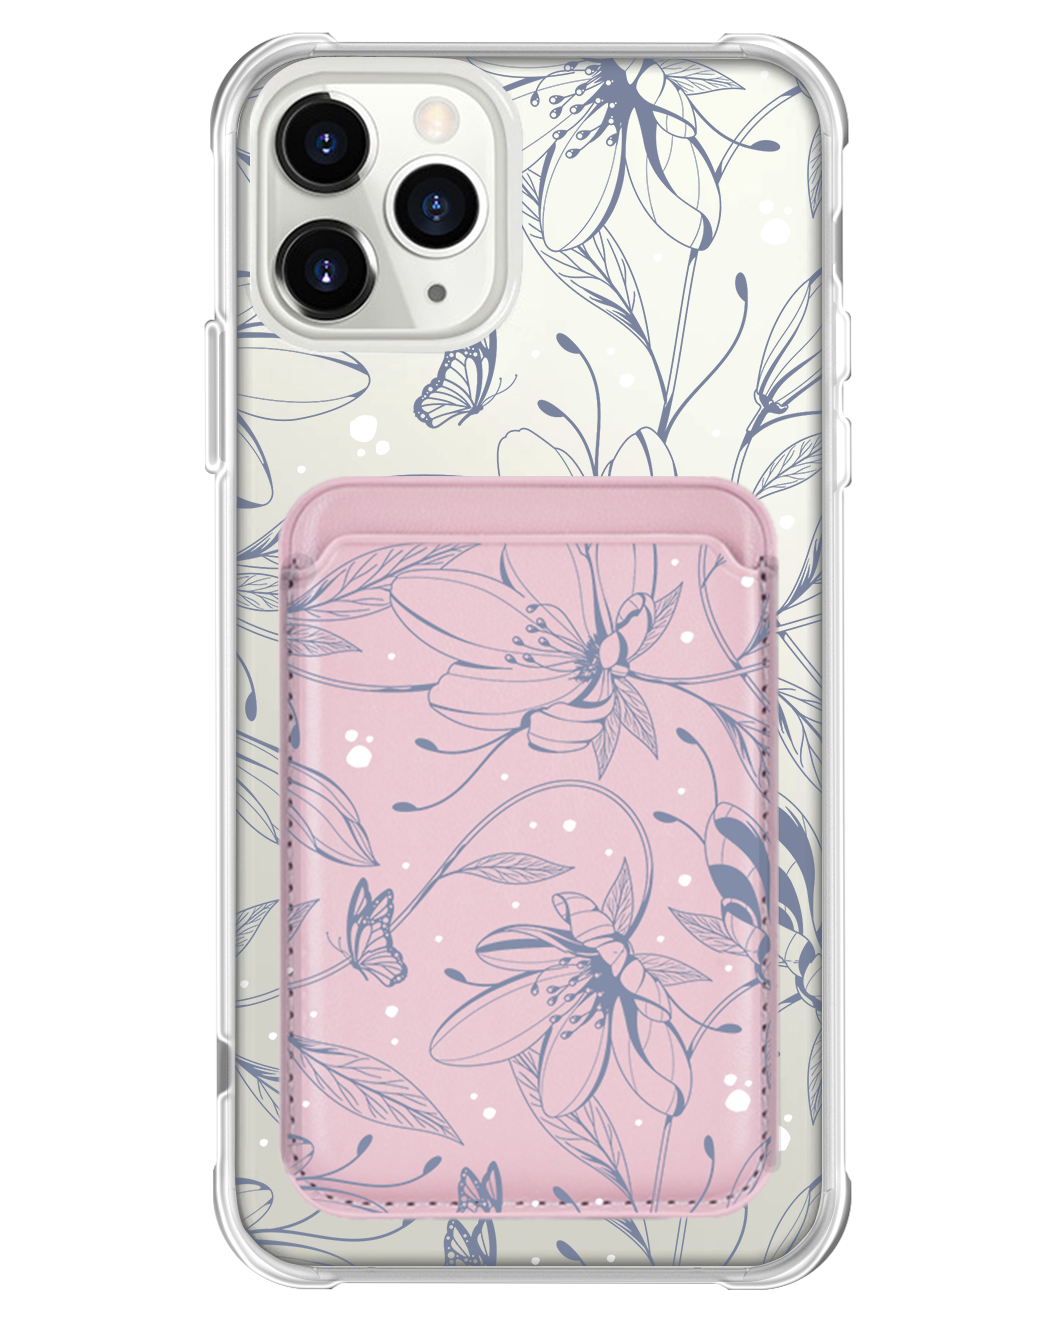 iPhone Magnetic Wallet Case - Sketchy Flower & Butterfly 2.0